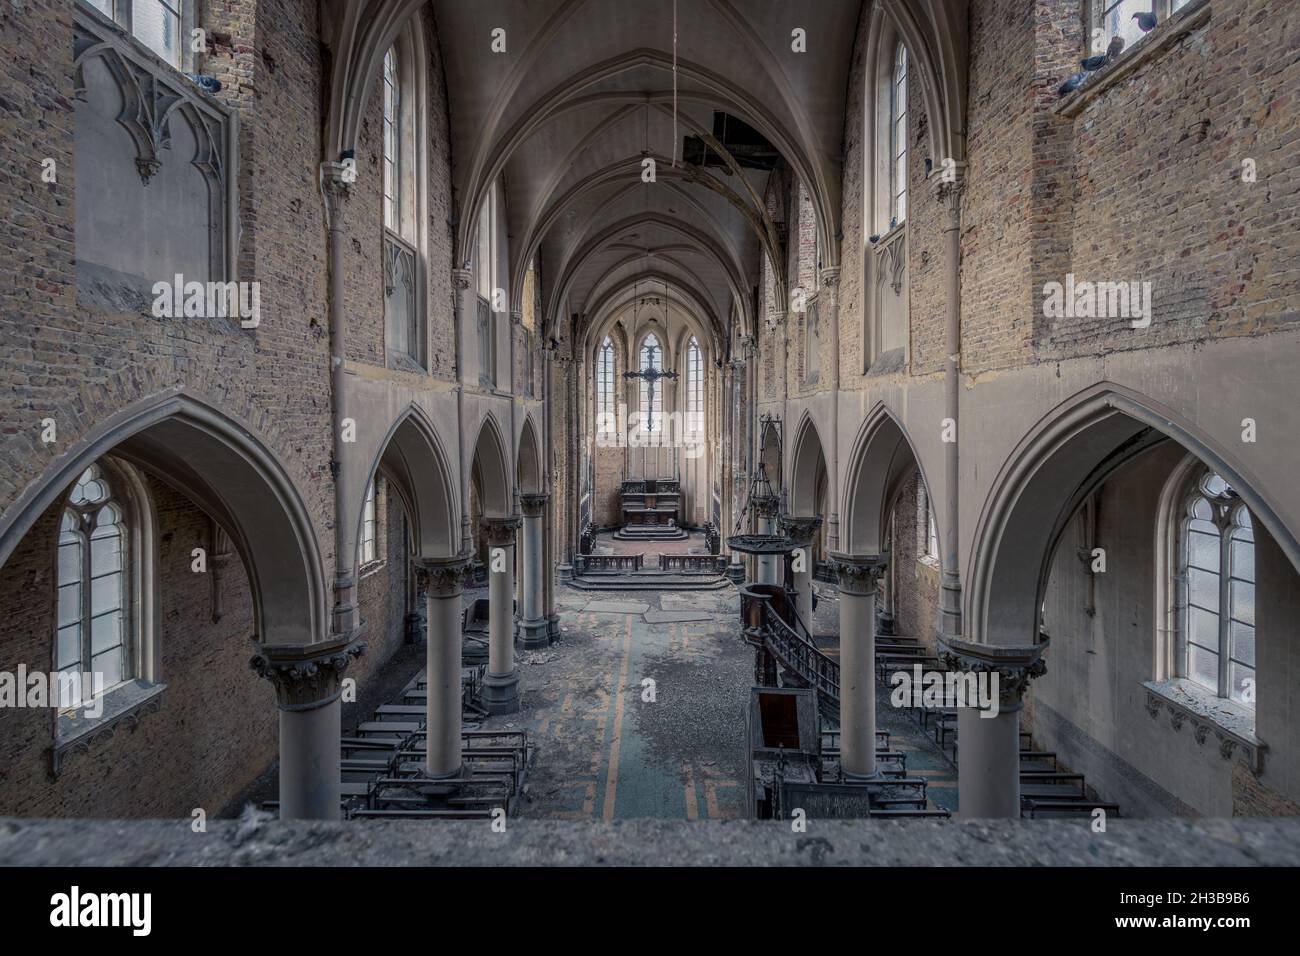 LUETTICH, BELGIUM - Feb 01, 2020: Photograph of an old abandoned church in Belgium. The light shines beautifully through the old windows. Stock Photo